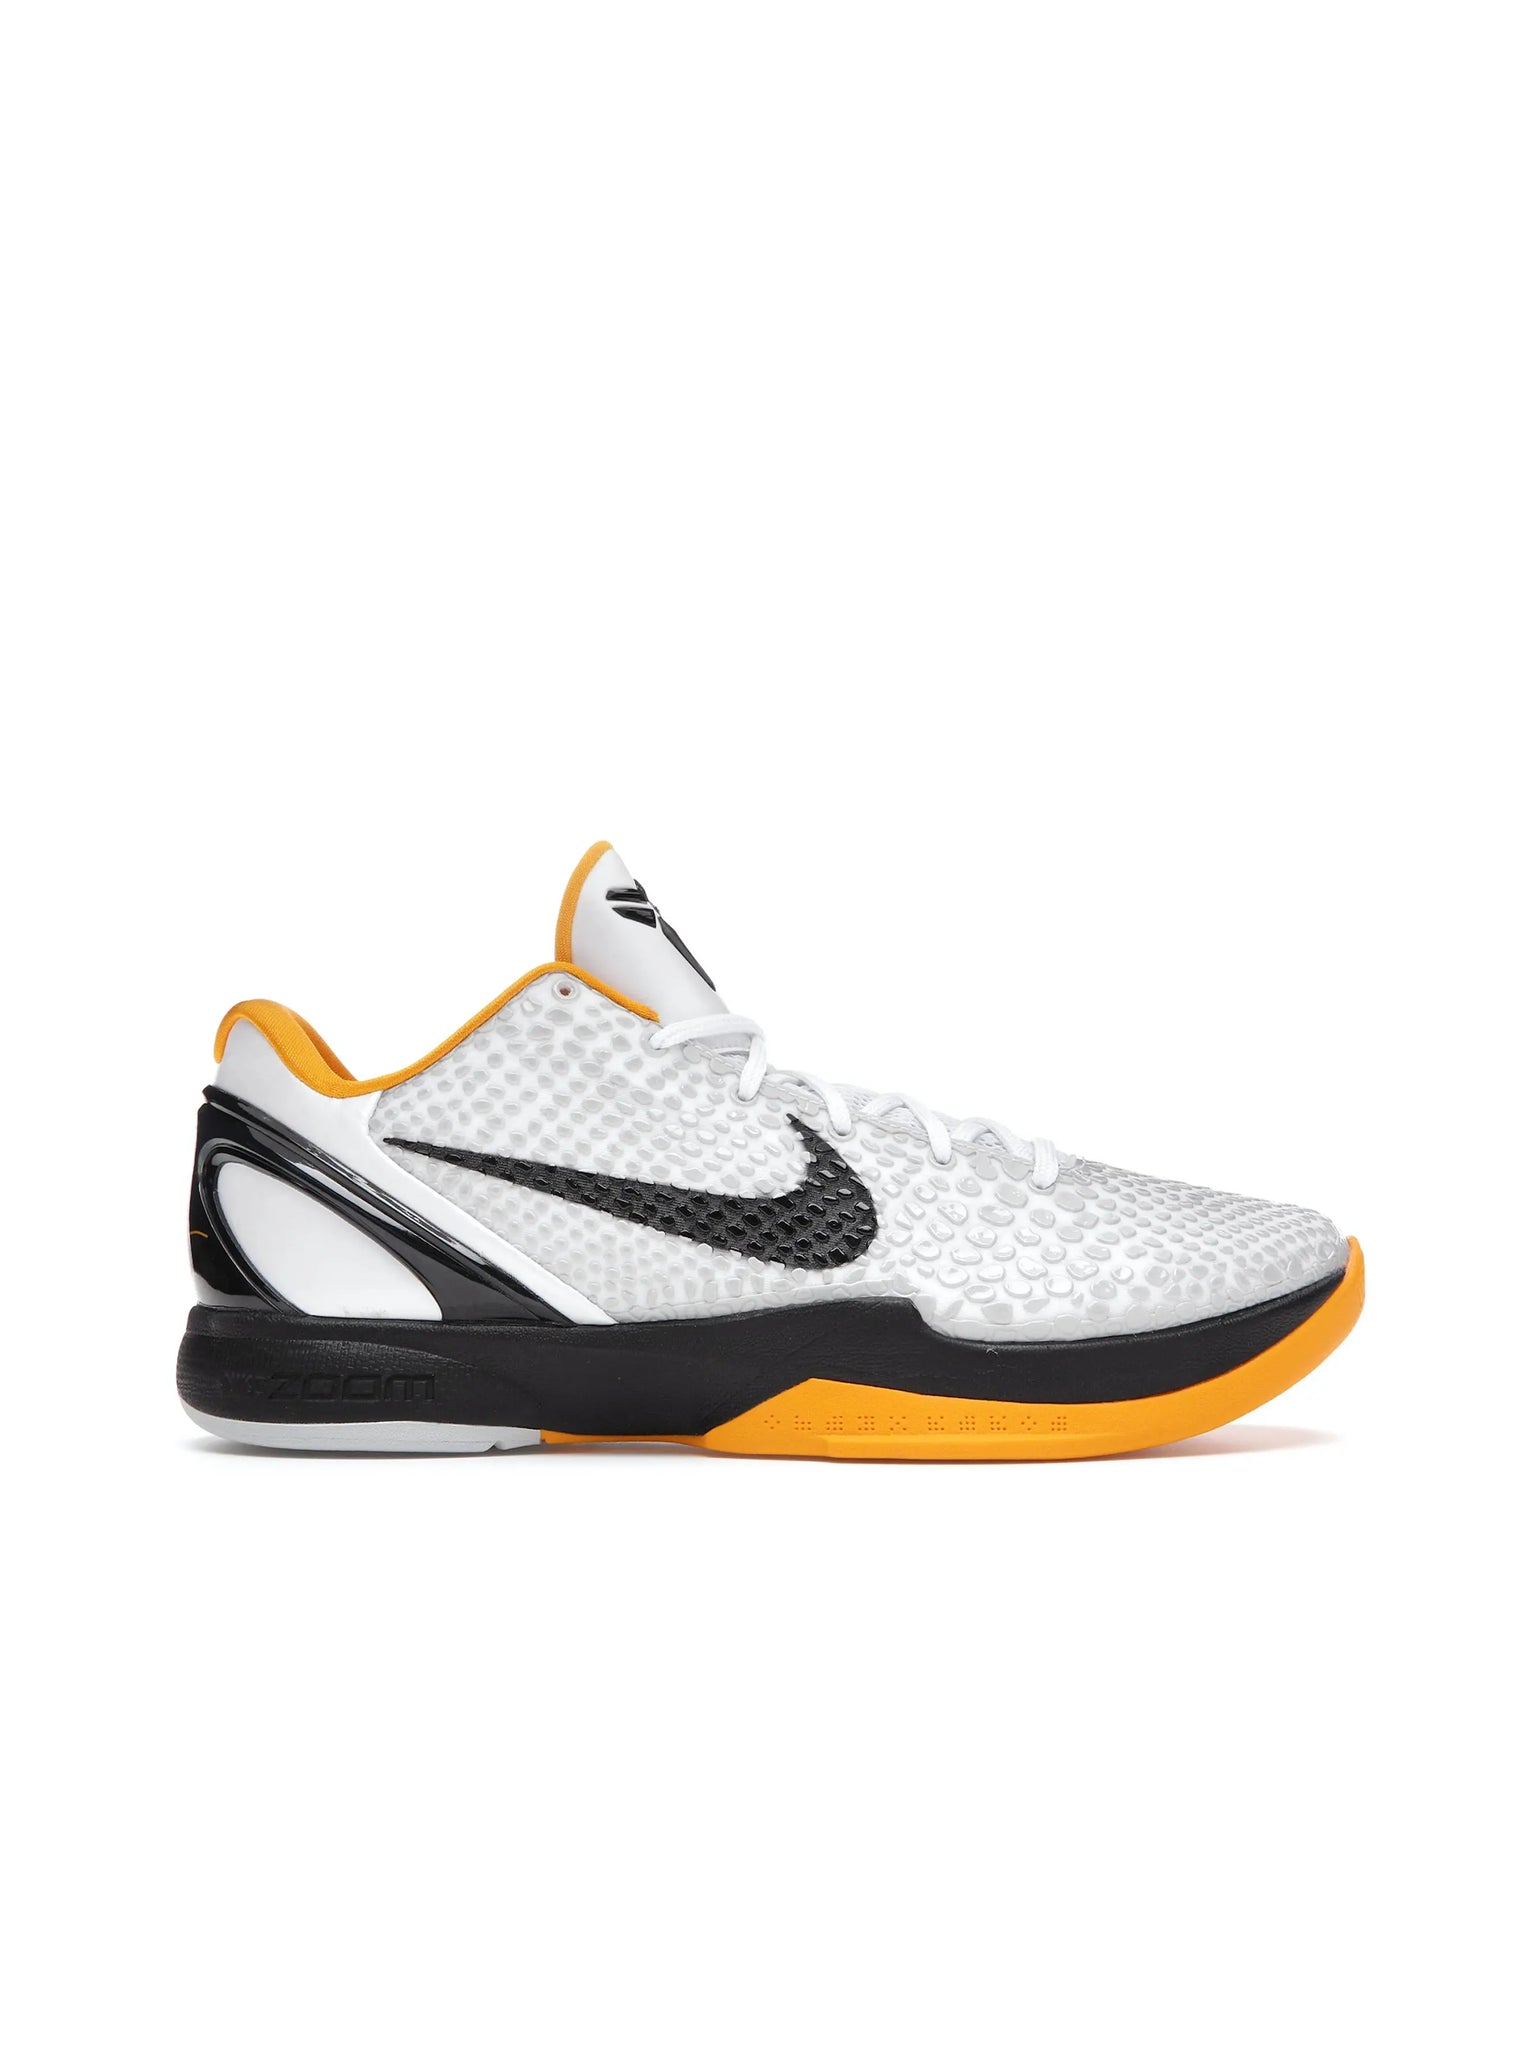 Nike Zoom Kobe 6 Protro Playoff Pack White Del Sol in Auckland, New Zealand - Shop name